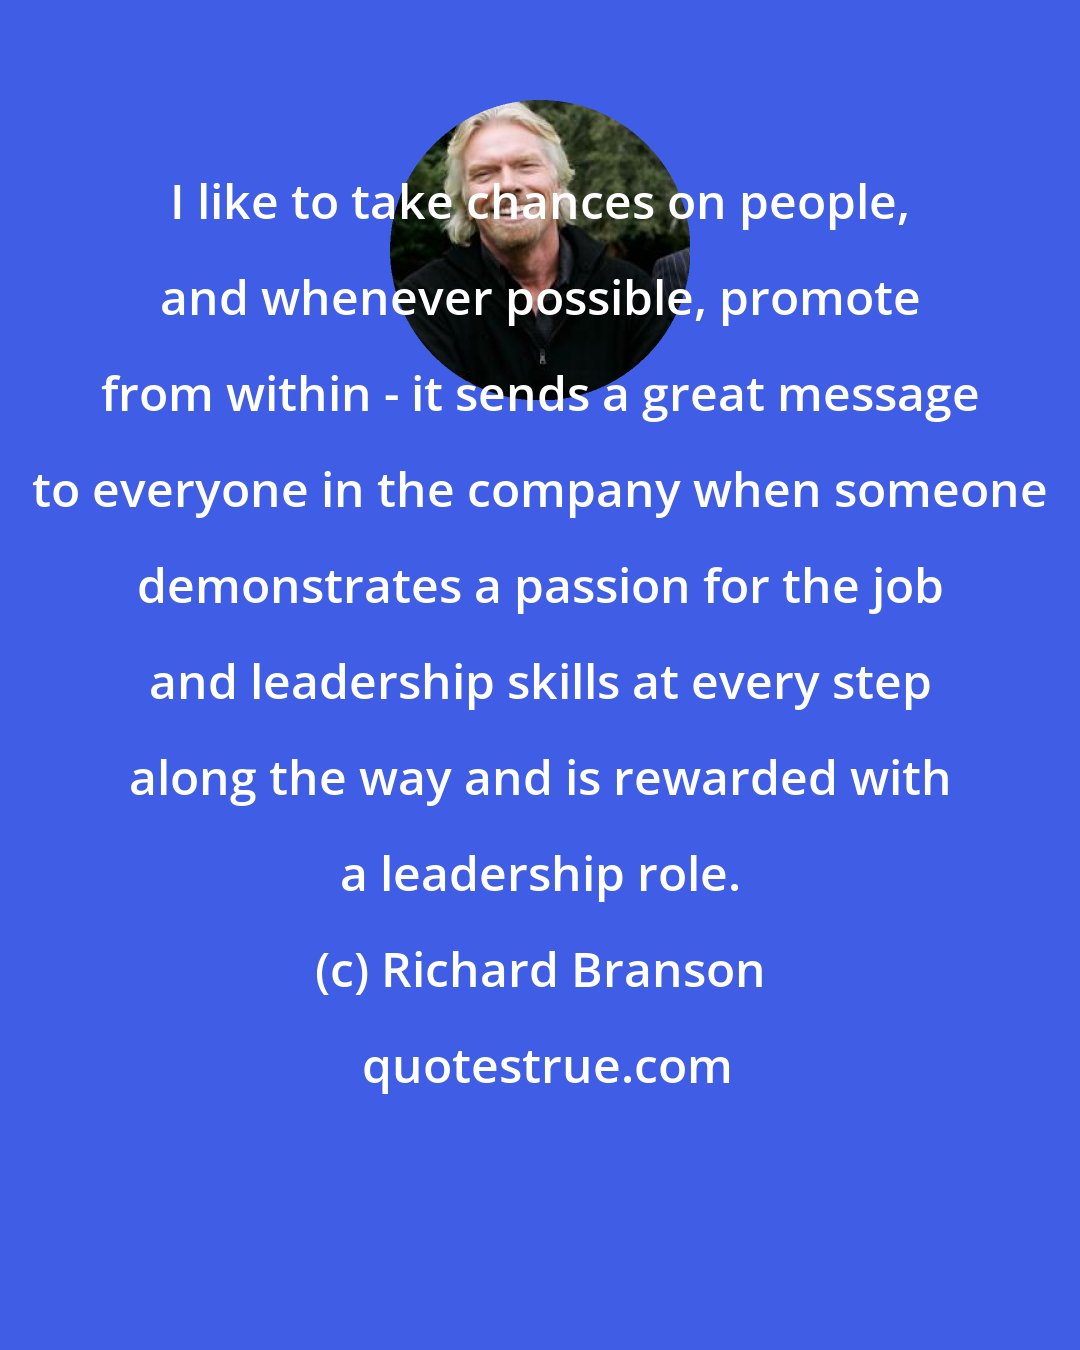 Richard Branson: I like to take chances on people, and whenever possible, promote from within - it sends a great message to everyone in the company when someone demonstrates a passion for the job and leadership skills at every step along the way and is rewarded with a leadership role.